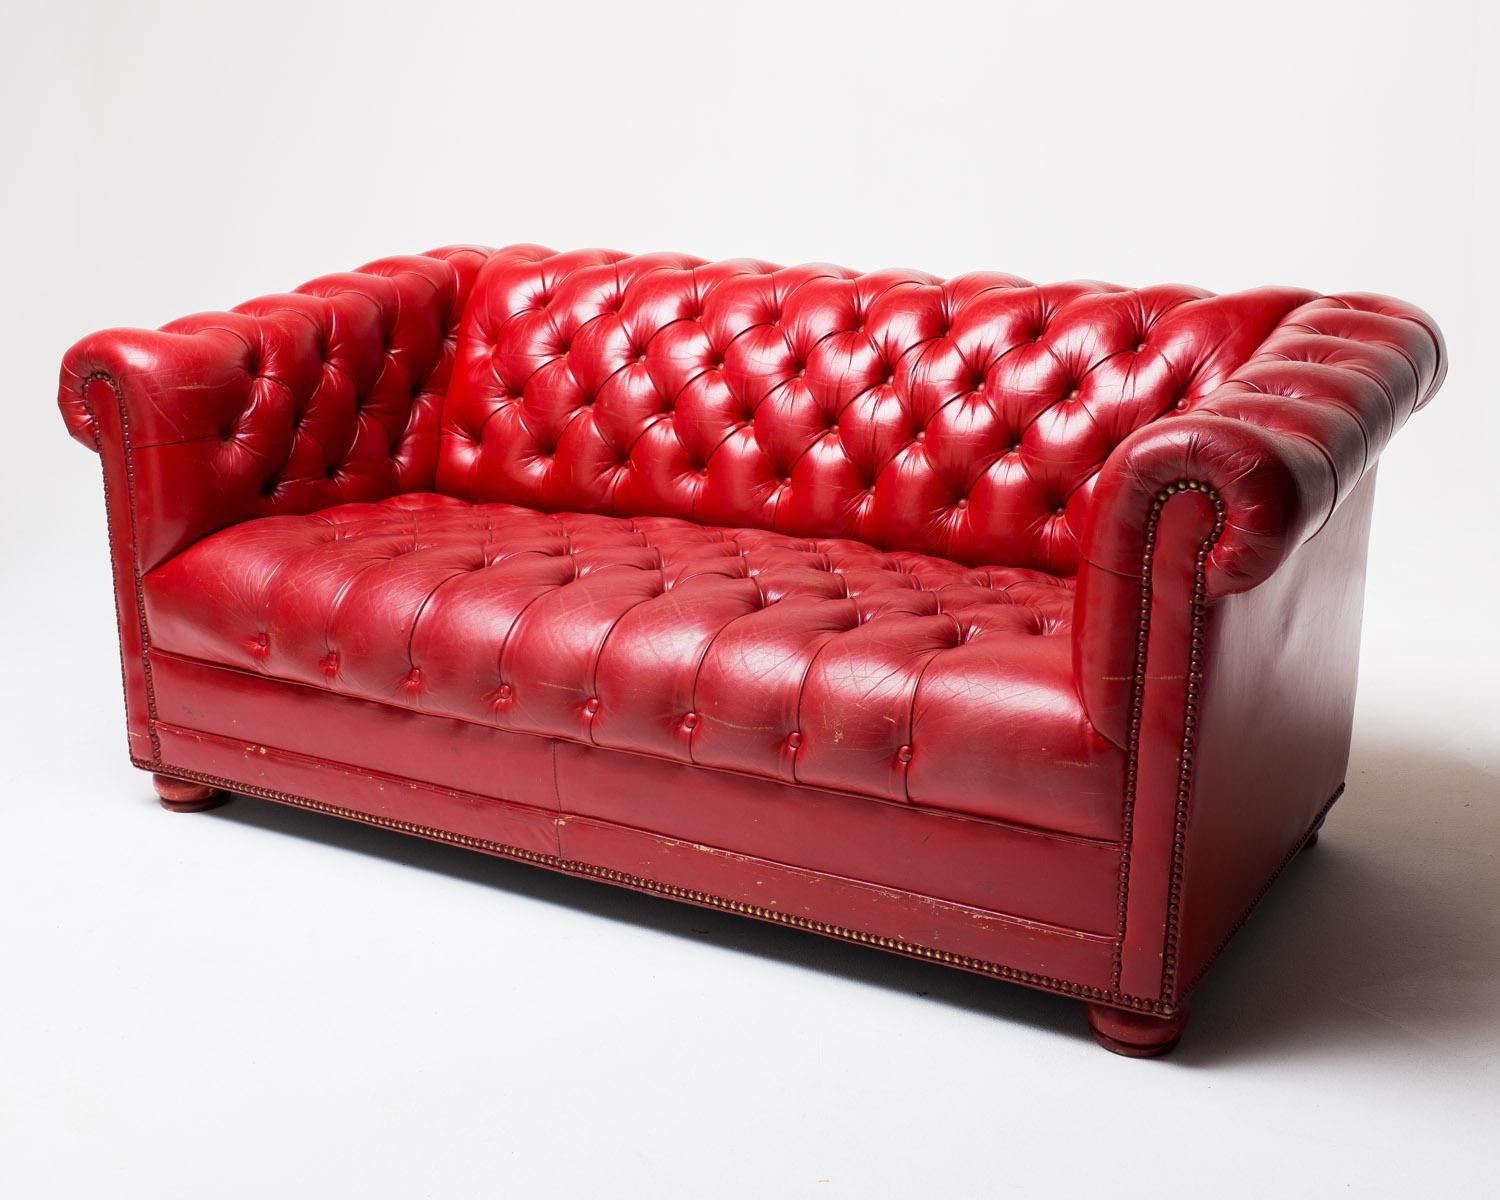 Co002 Red Leather Sofa | Acme Studio Intended For Dark Red Leather Couches (View 12 of 20)